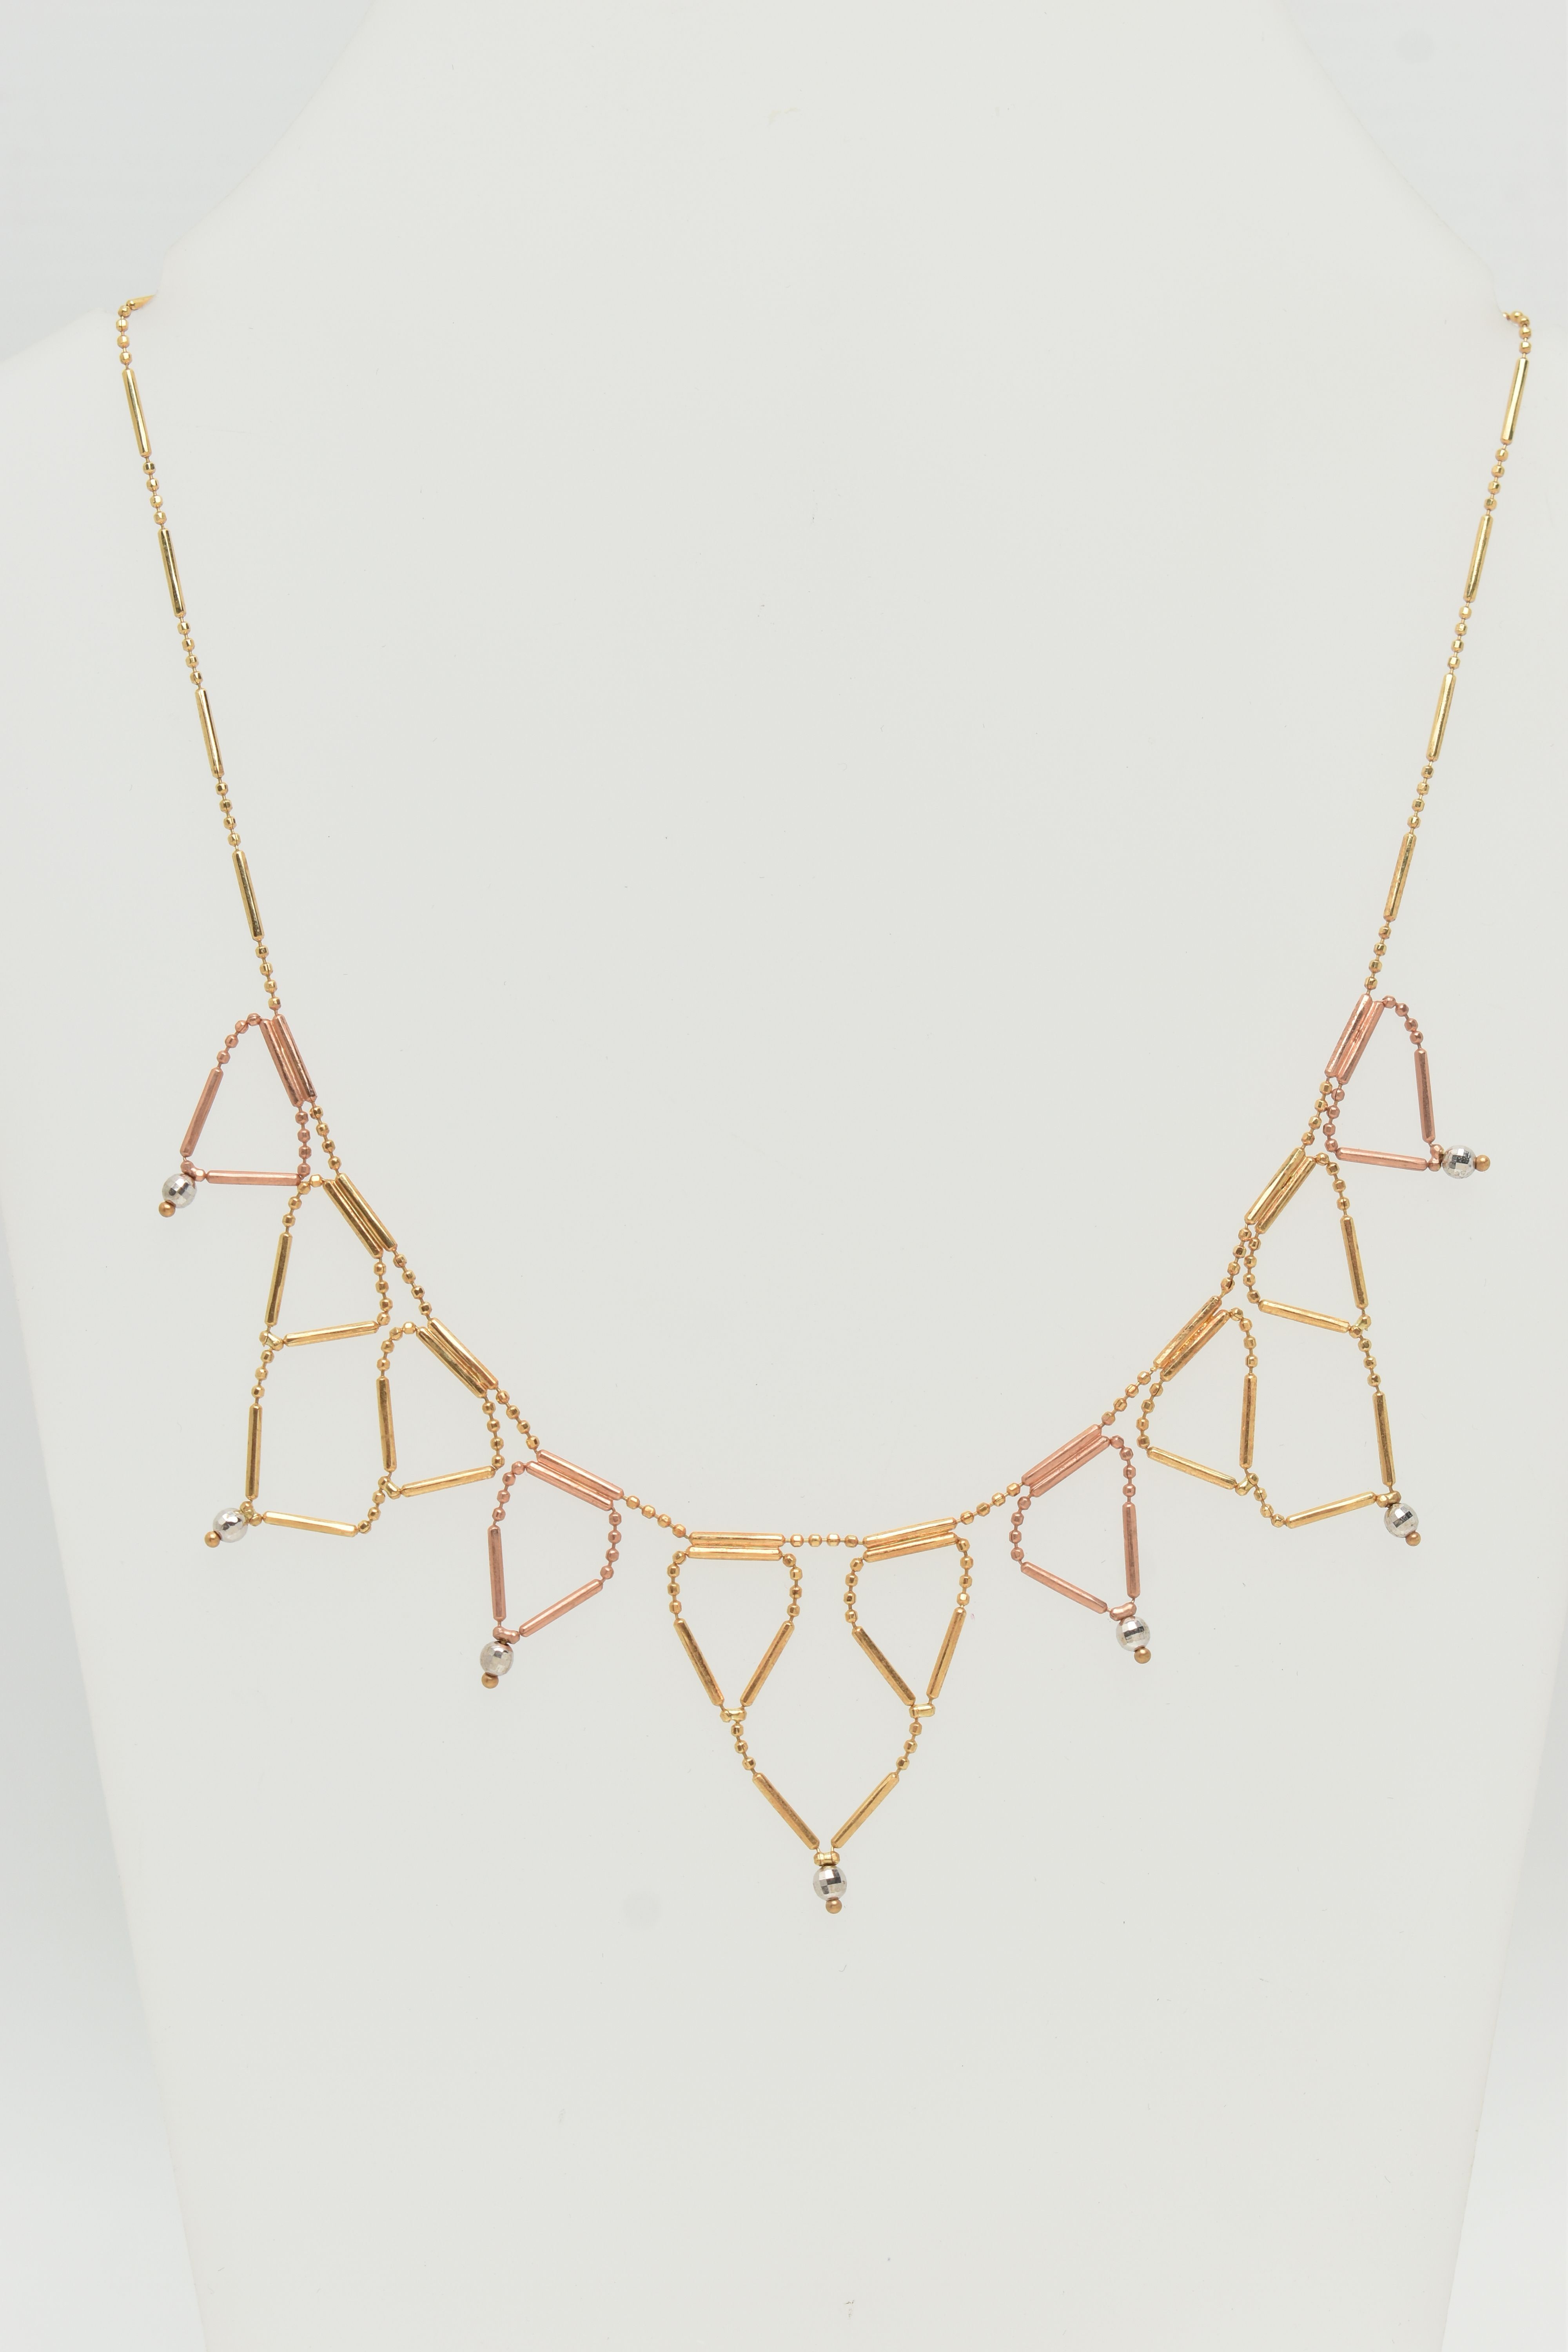 A BI-COLOUR FRINGE NECKLACE, the faceted and tubular design chain suspending triangular fringe drops